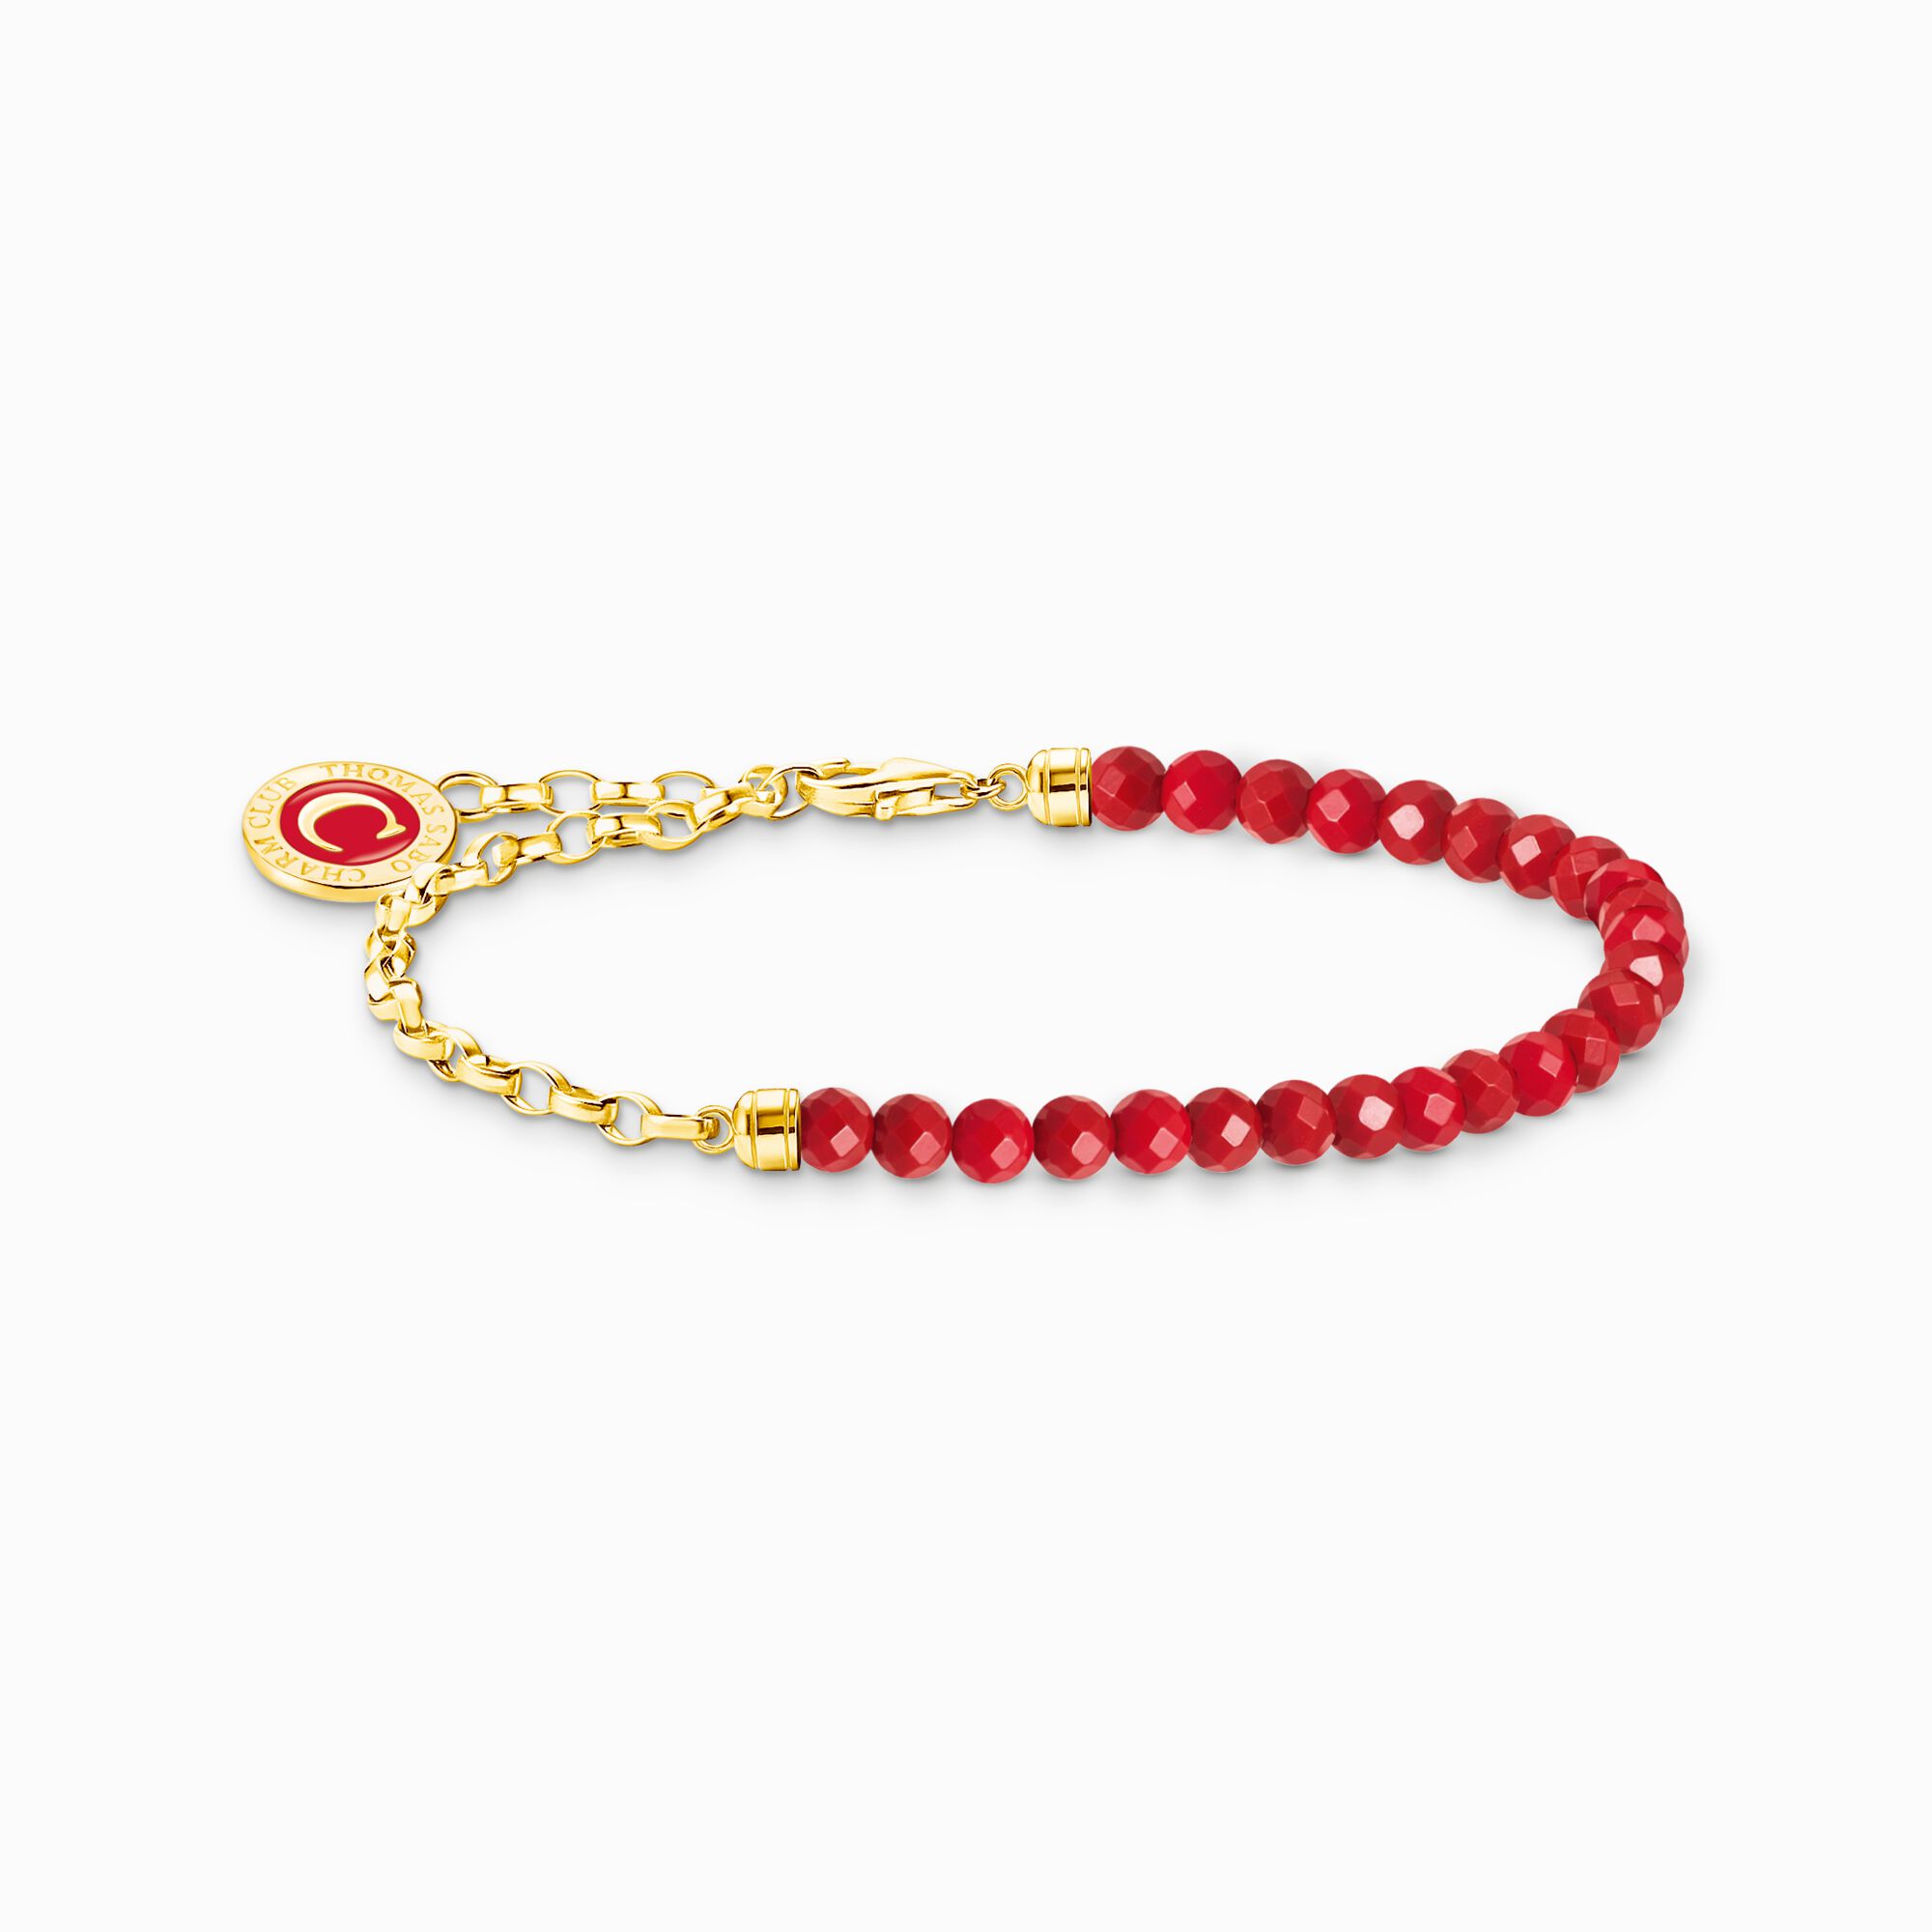 Gold-plated member charm bracelet with red beads from the Charm Club collection in the THOMAS SABO online store